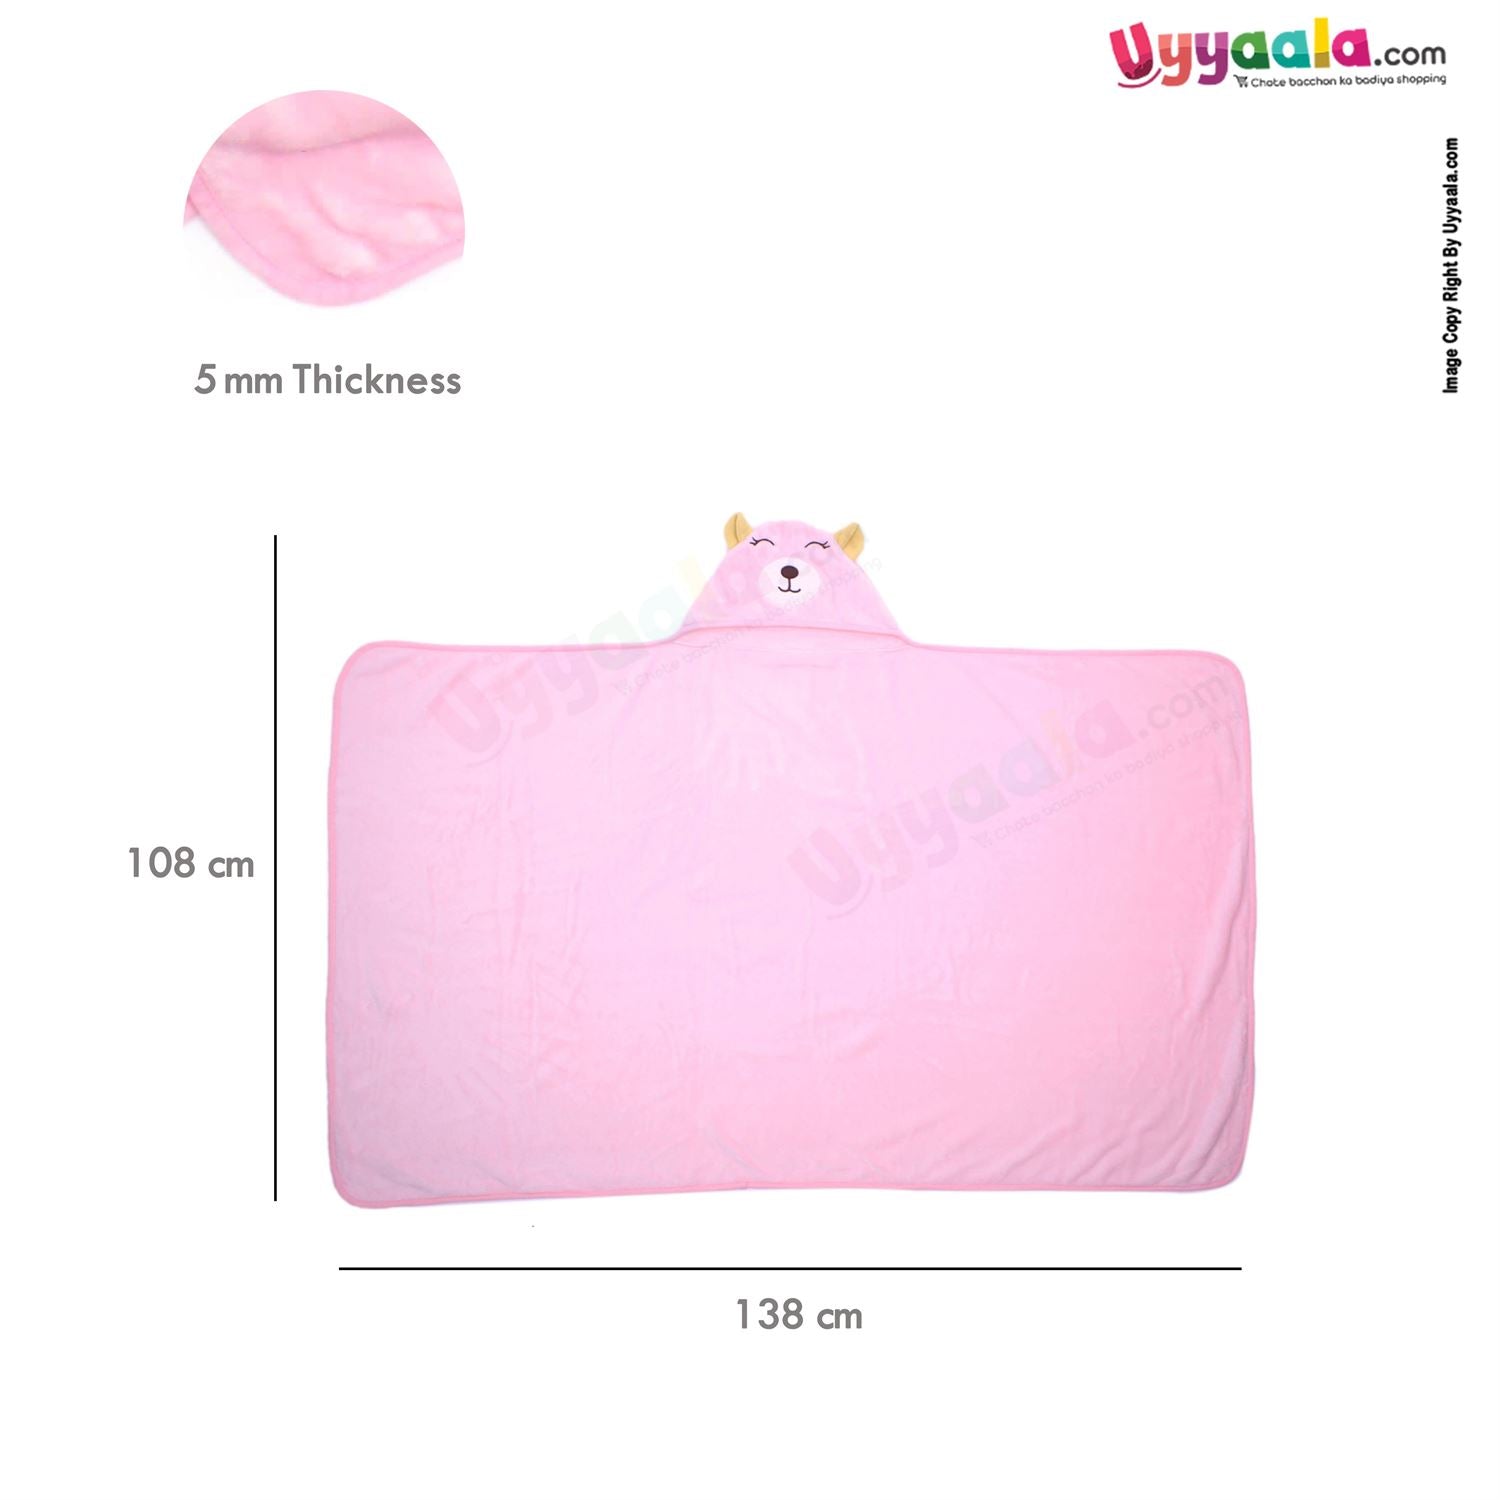 Hooded Coral Fur Blanket Bear Character 0-24m, Pink